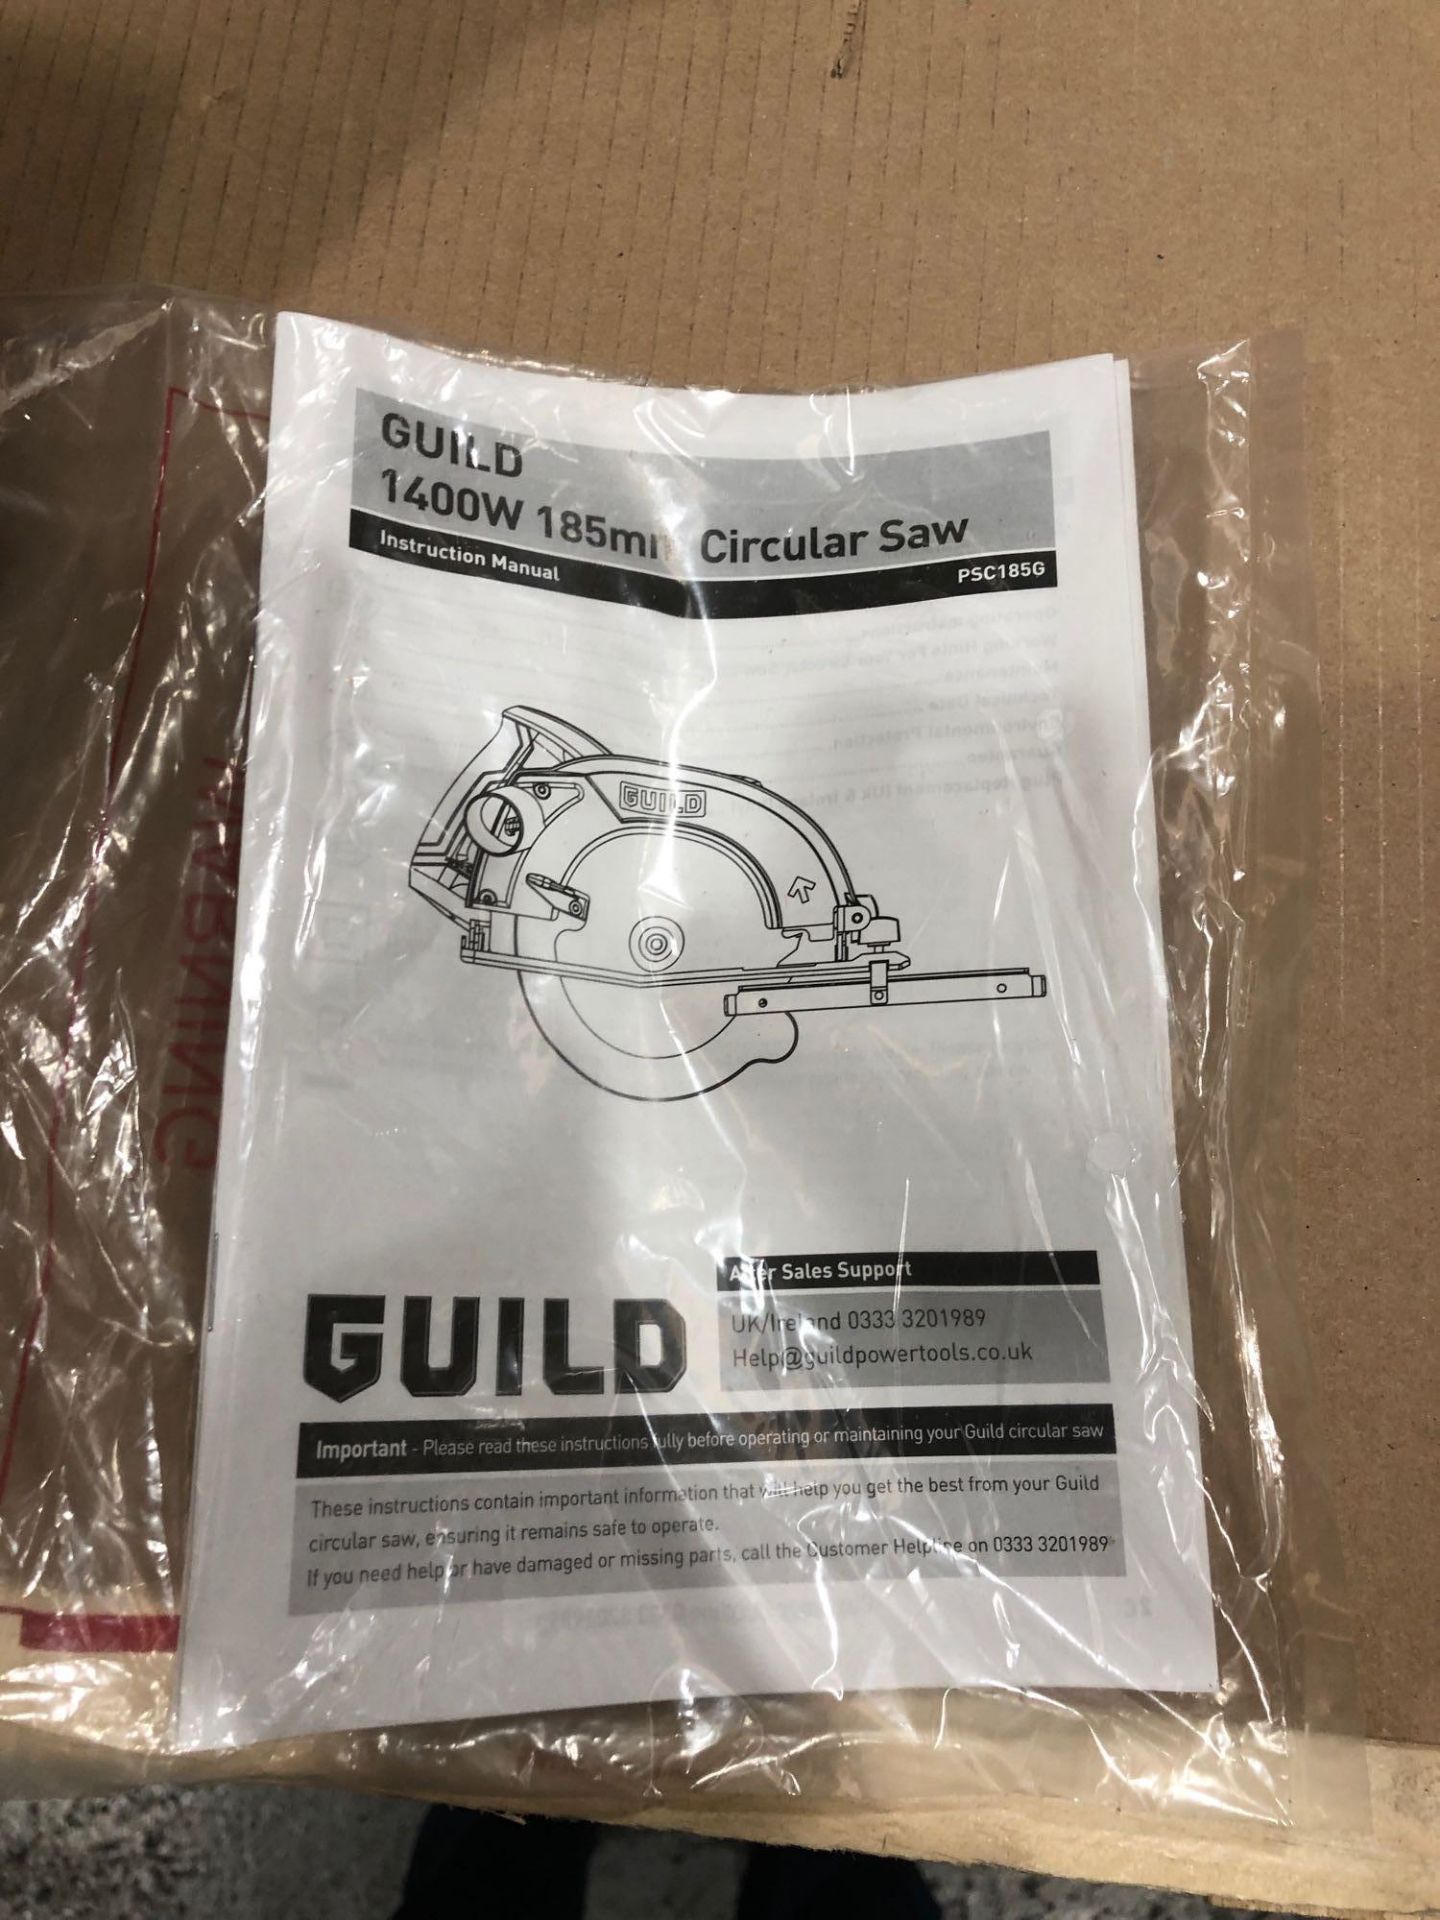 Guild 185mm Circular Saw - 1400W PSC185G £50.00 RRP - Image 5 of 6